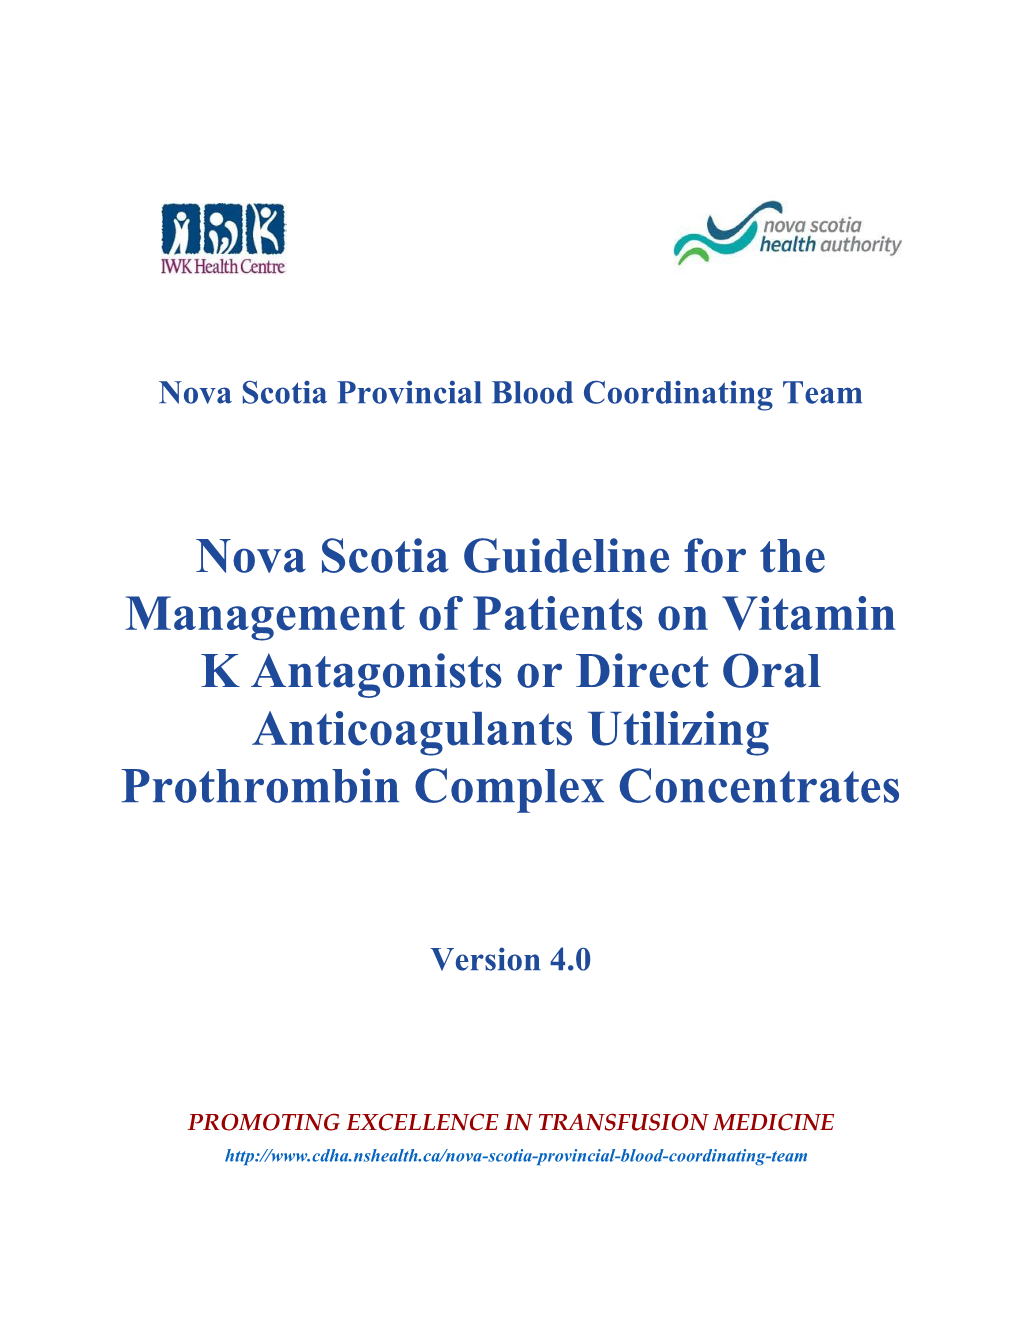 Nova Scotia Guideline for the Management of Patients on Vitamin K Antagonists Or Direct Oral Anticoagulants Utilizing Prothrombin Complex Concentrates